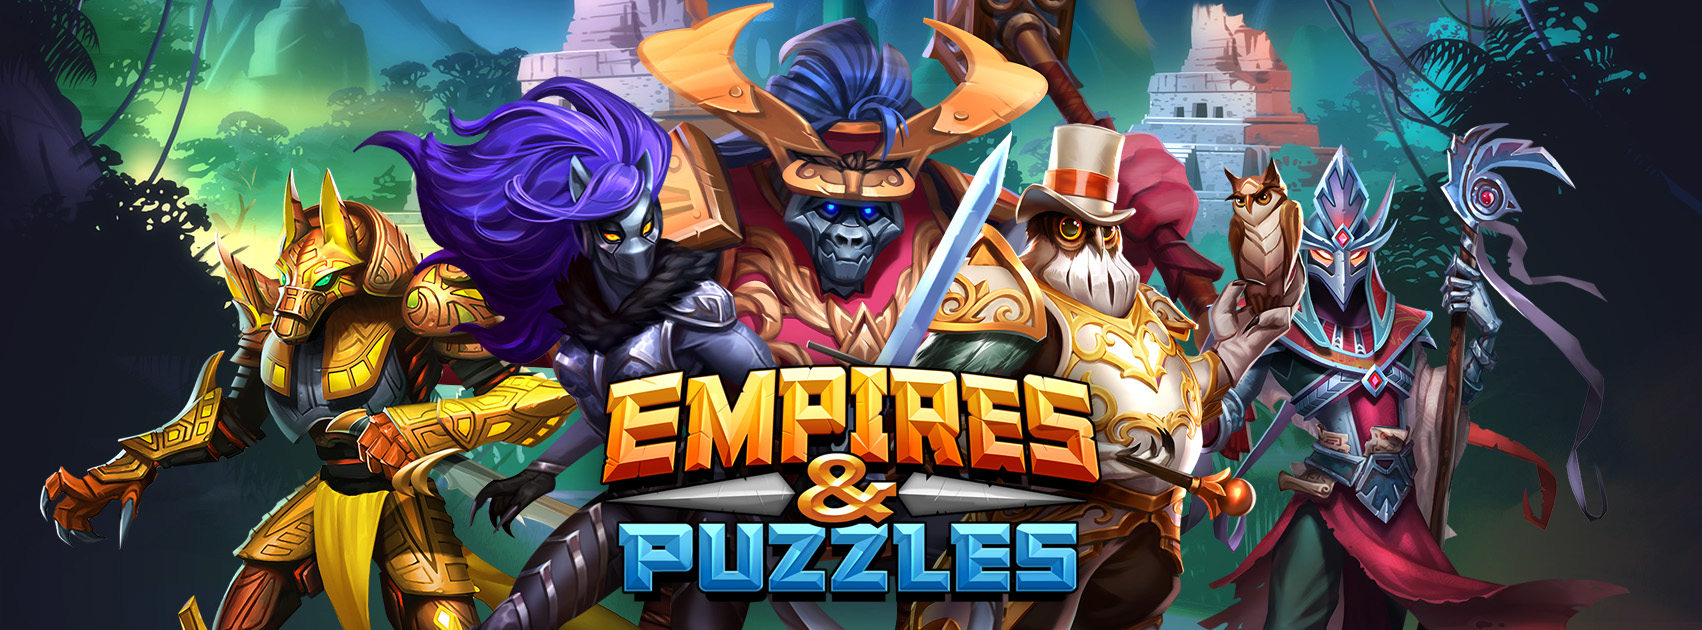 Challenge Event Empires and Puzzles Wiki Fandom